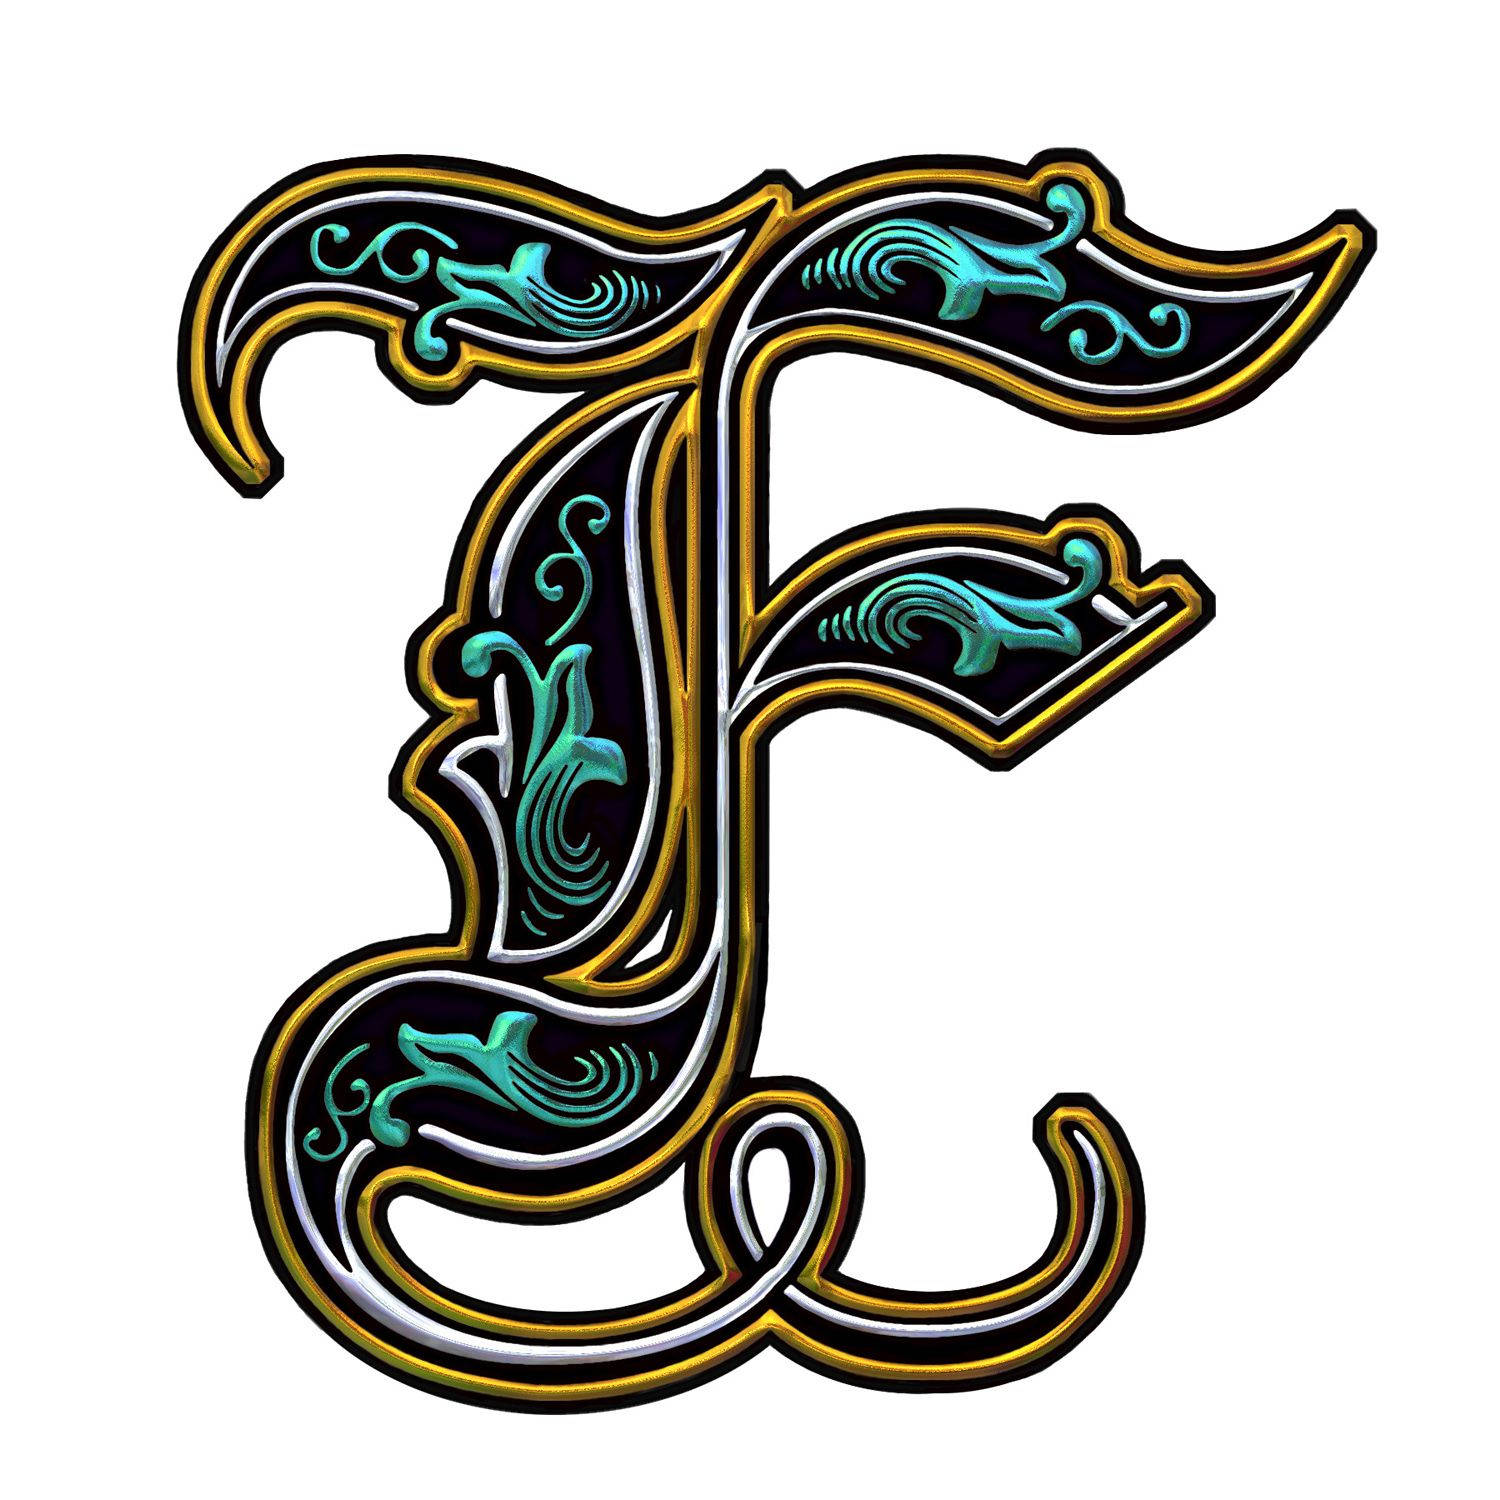 Free Letter F Wallpaper Downloads, [100+] Letter F Wallpapers for FREE |  